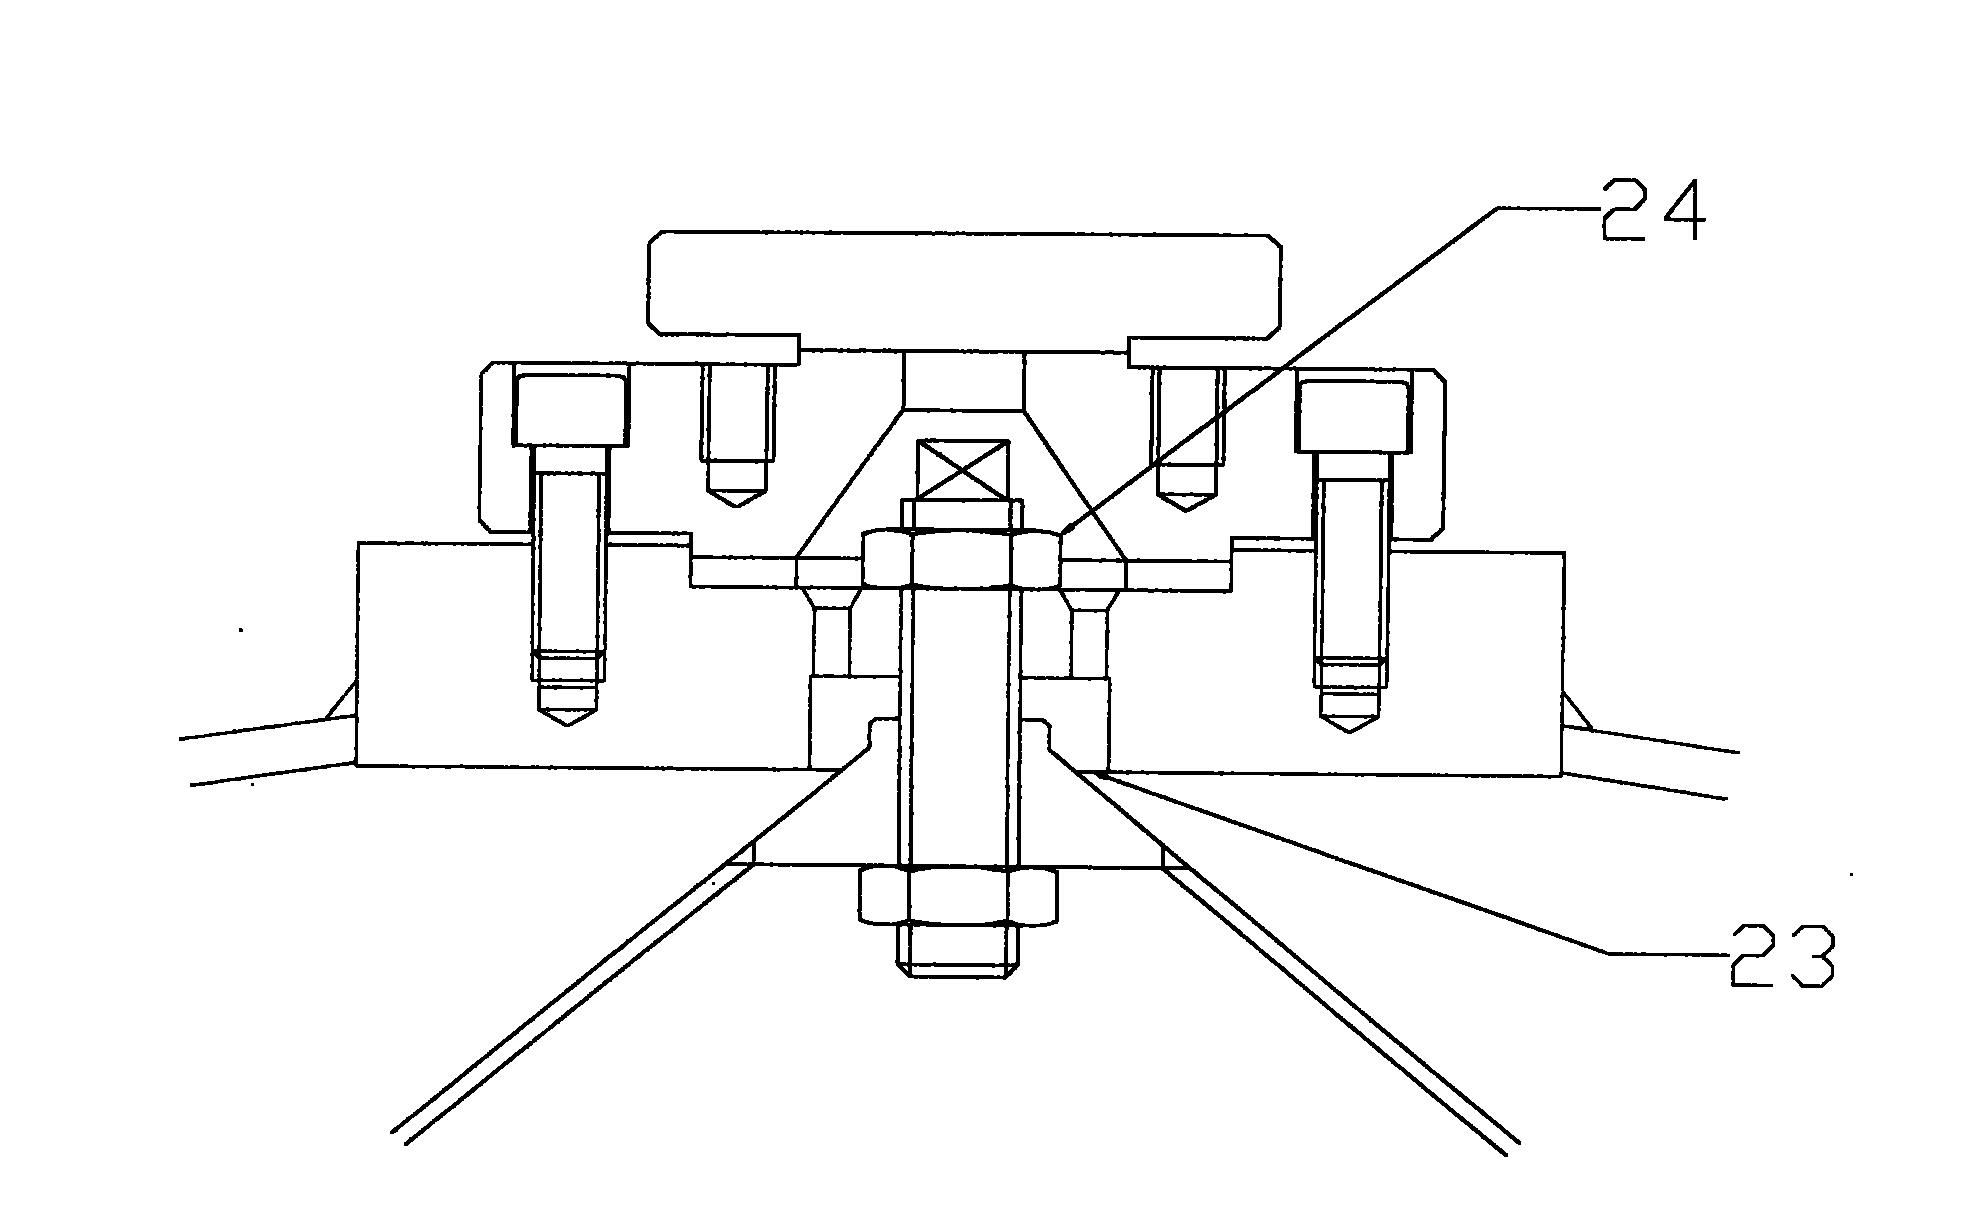 Device for continuously and rapidly defoaming high-viscosity fluid